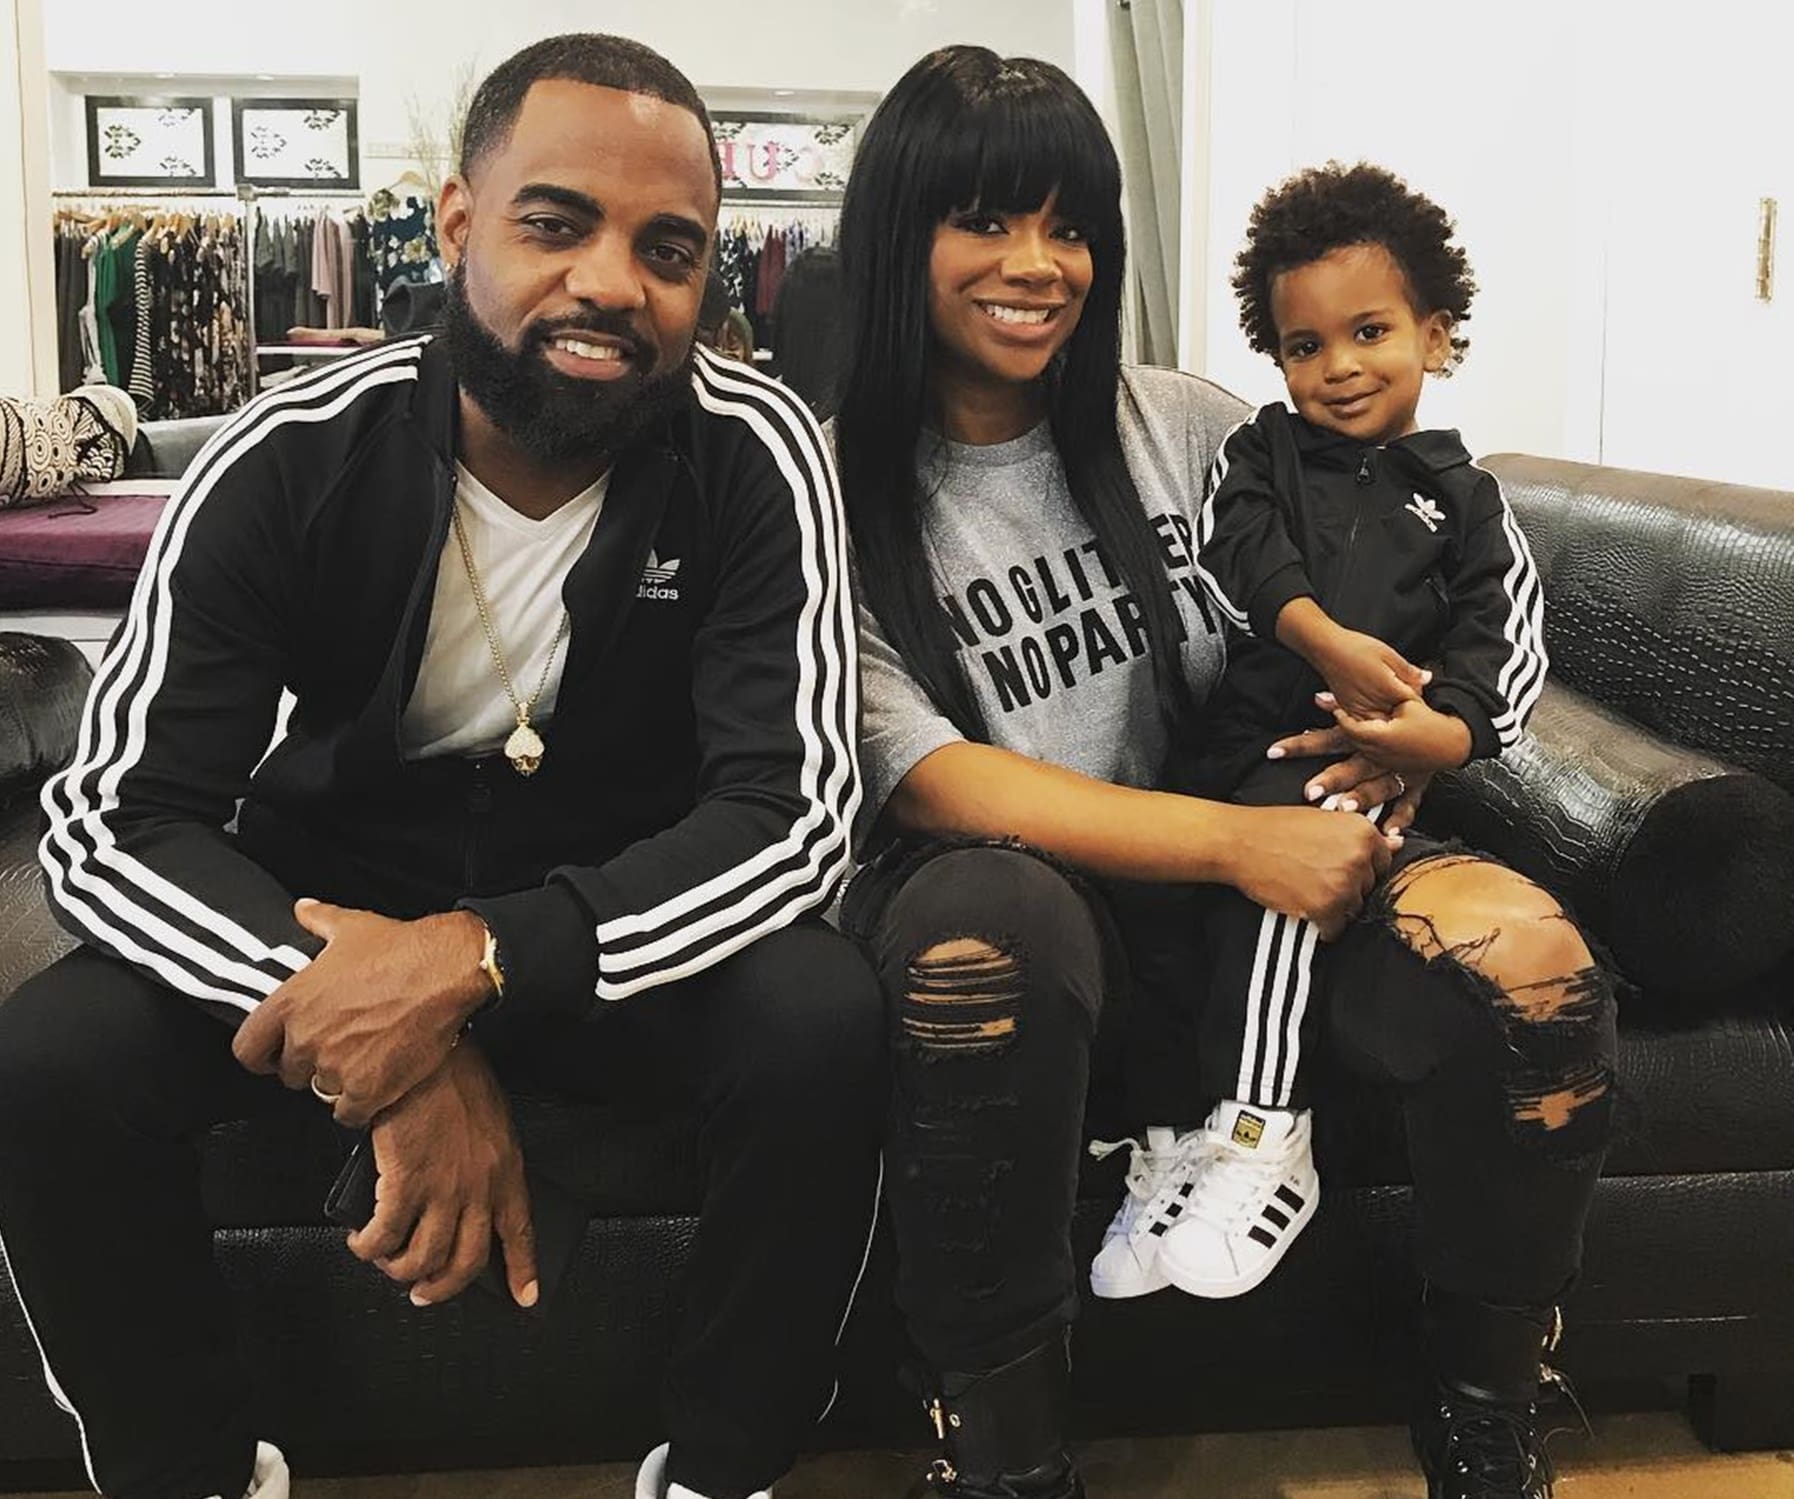 Watch Kandi Burruss' Video With Todd Tucker And Ace To See Their Morning Routine Before School